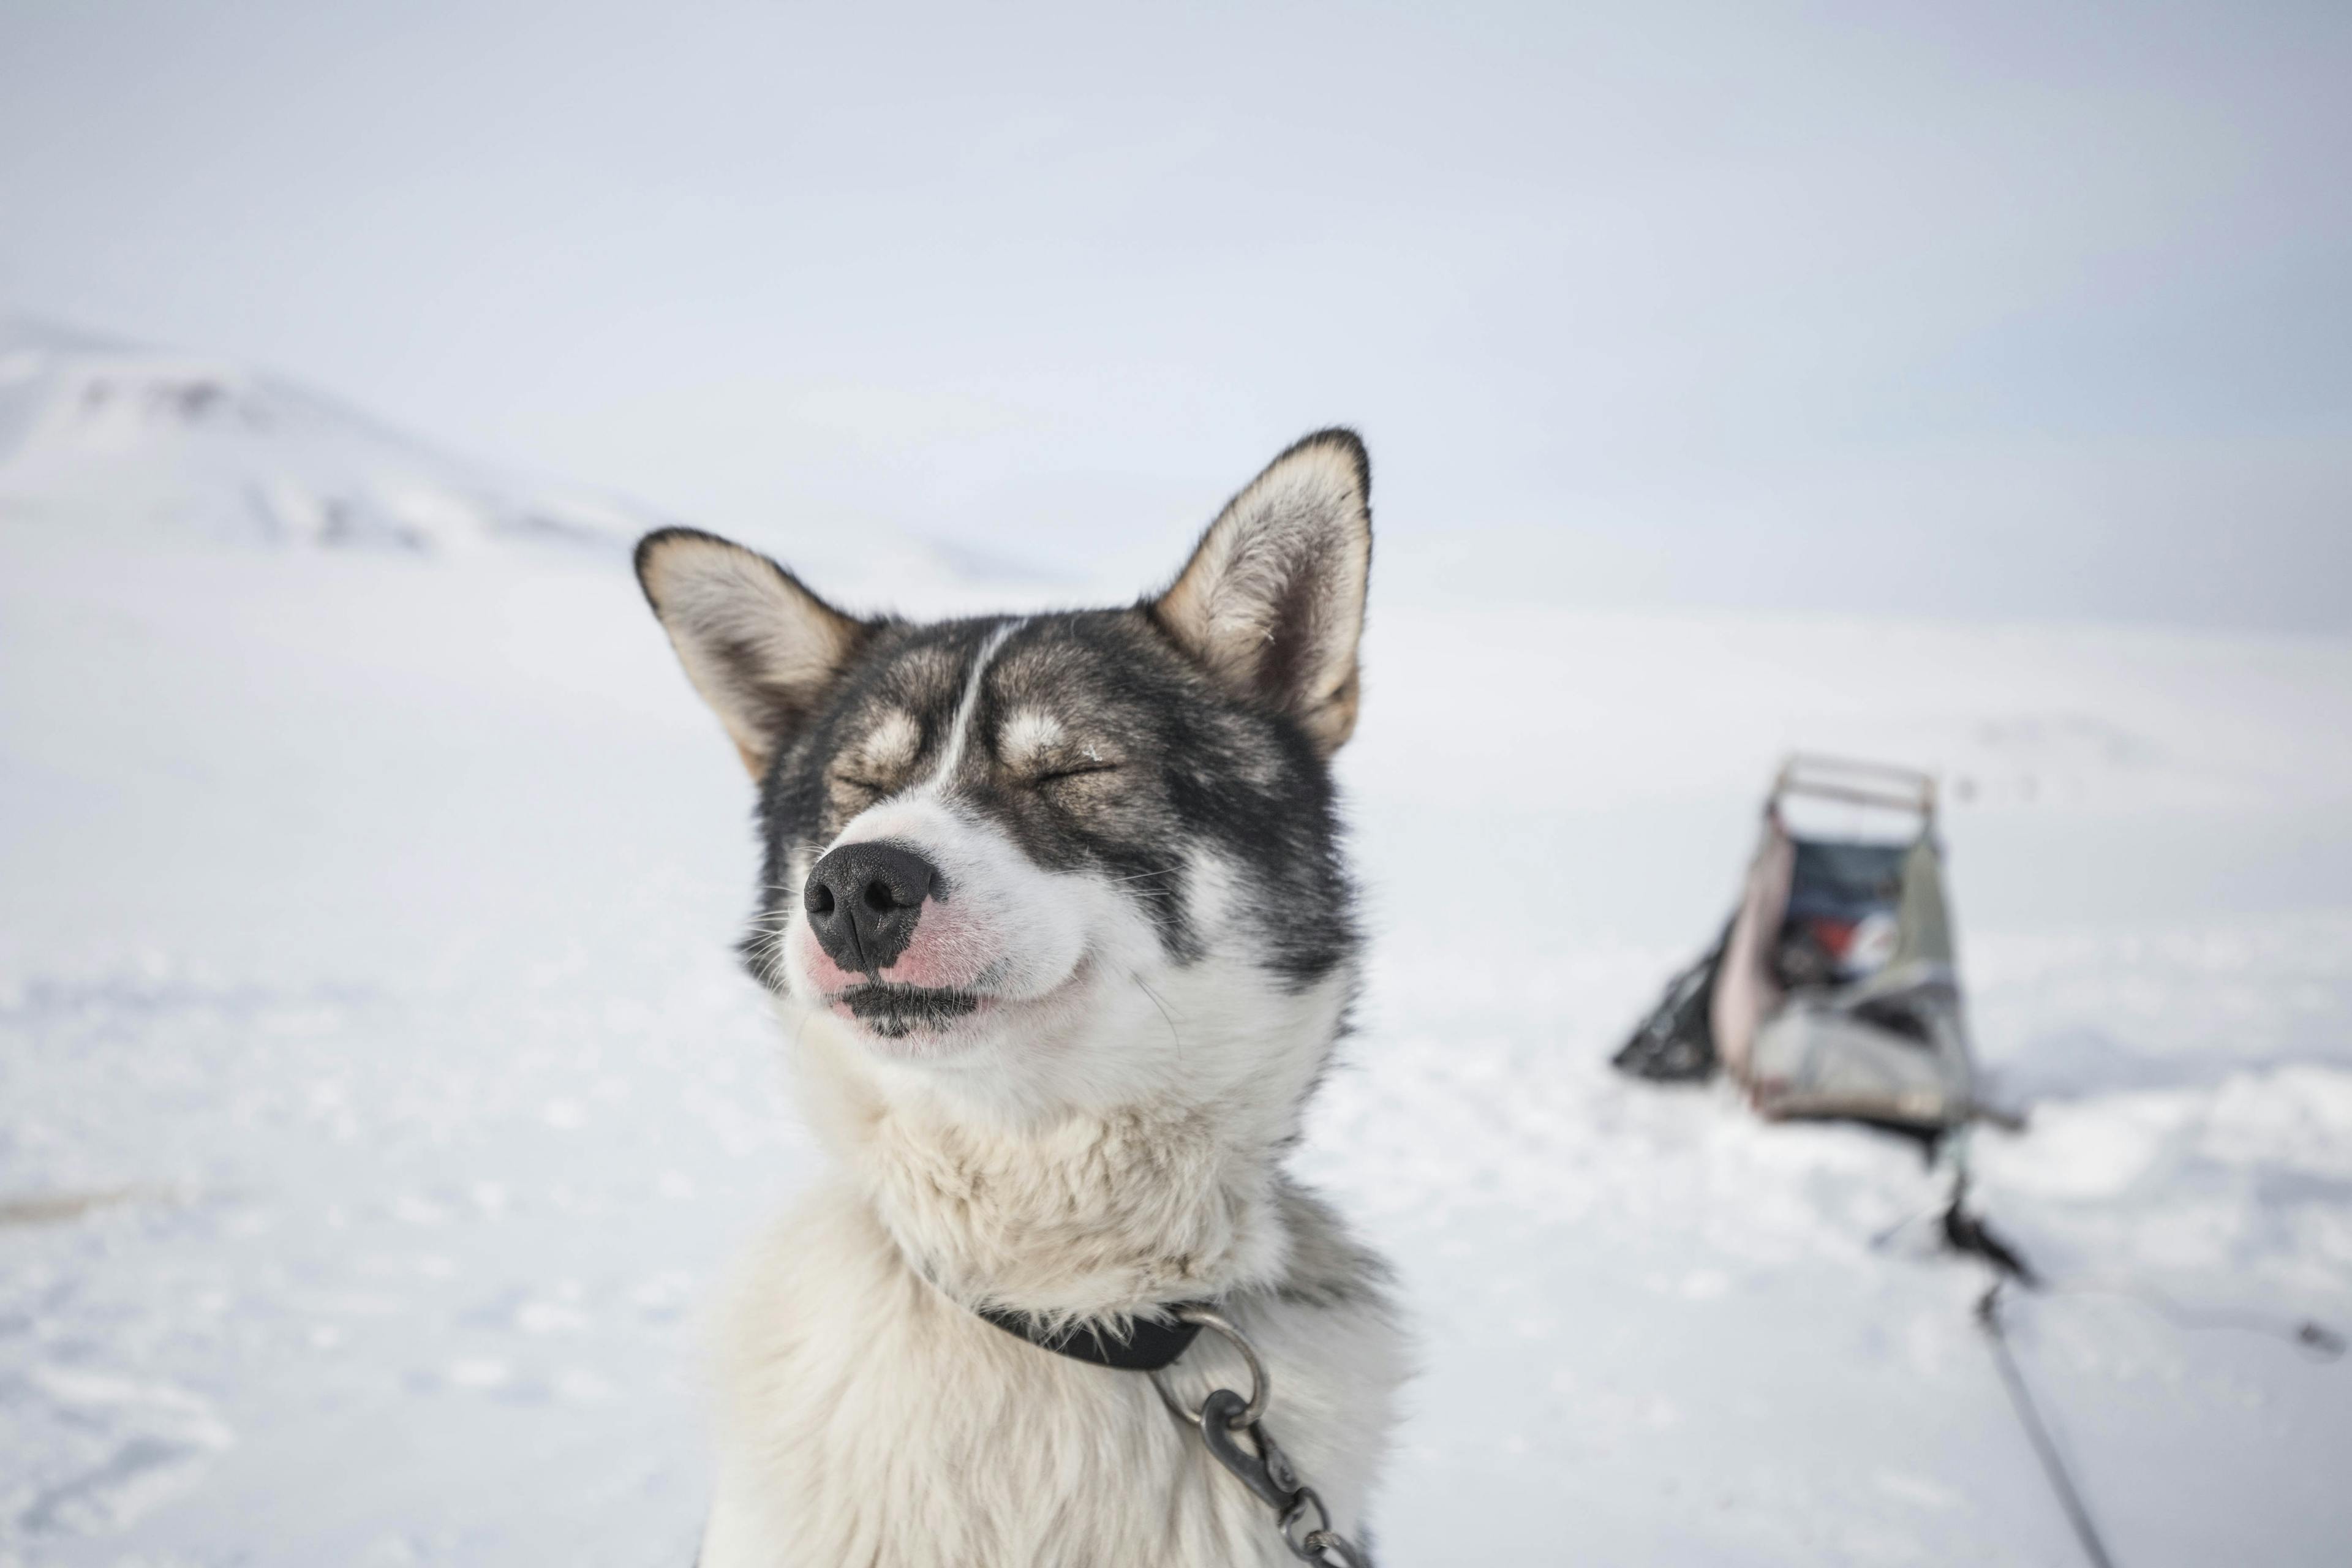 Husky dog waiting to pull people sledging